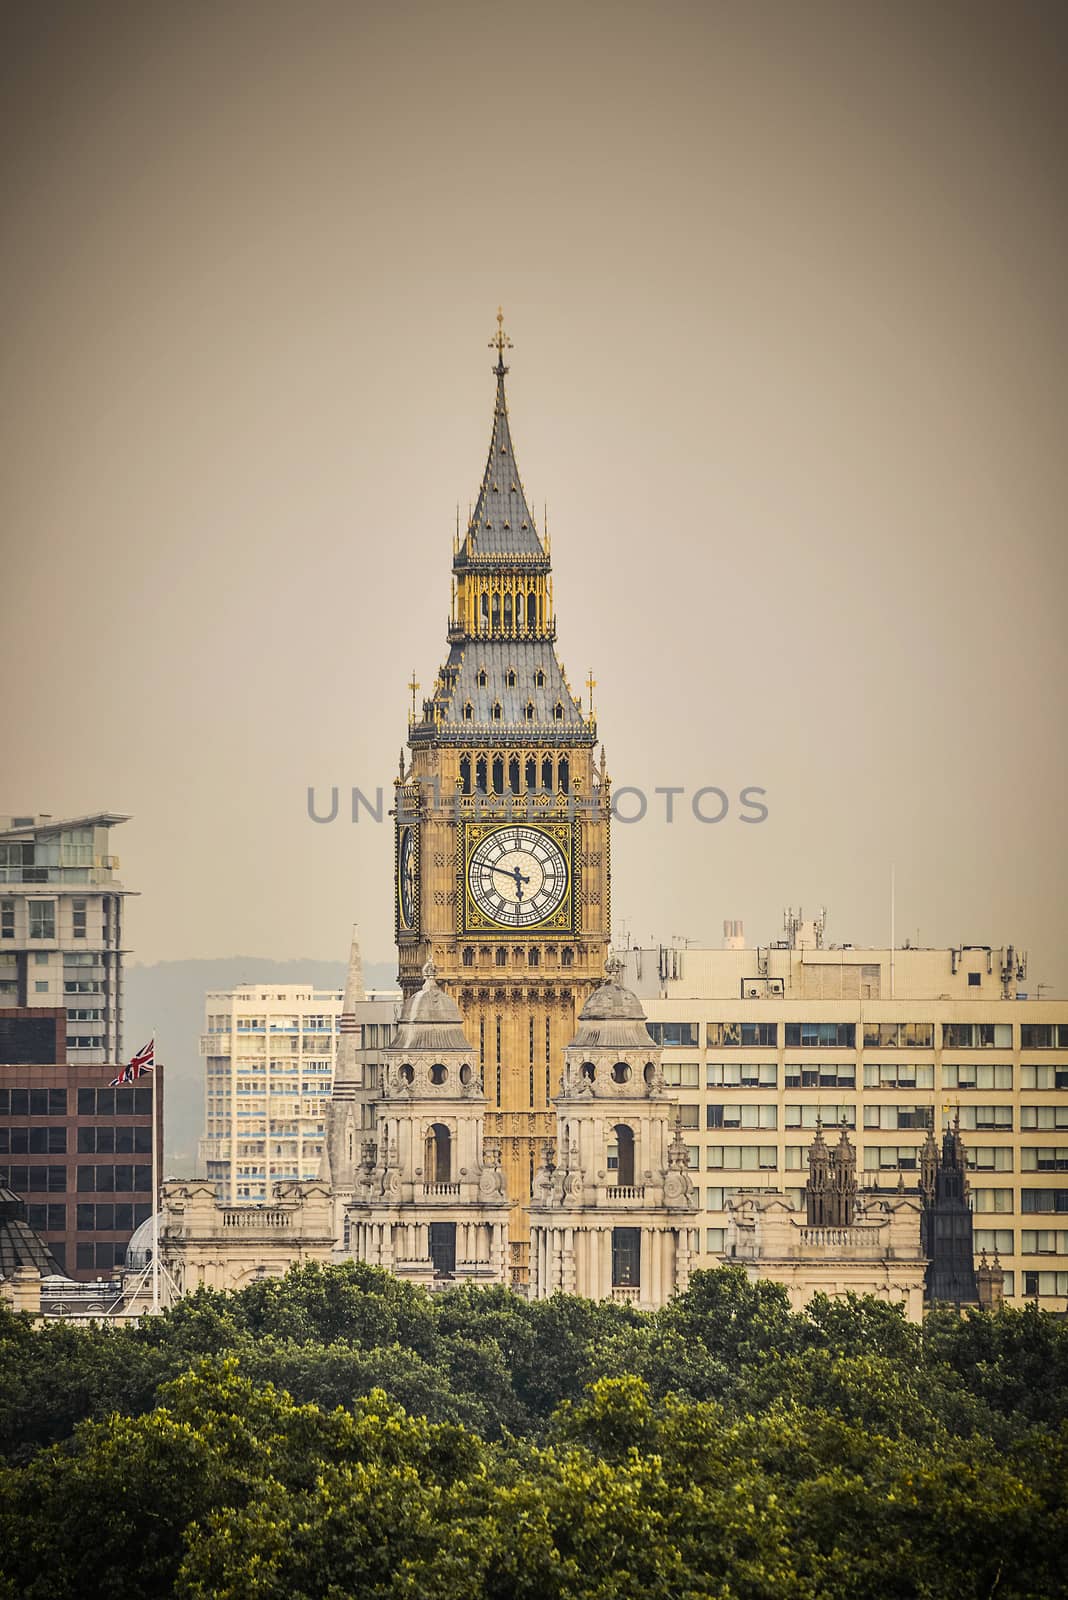 The Clock Tower in London by dutourdumonde